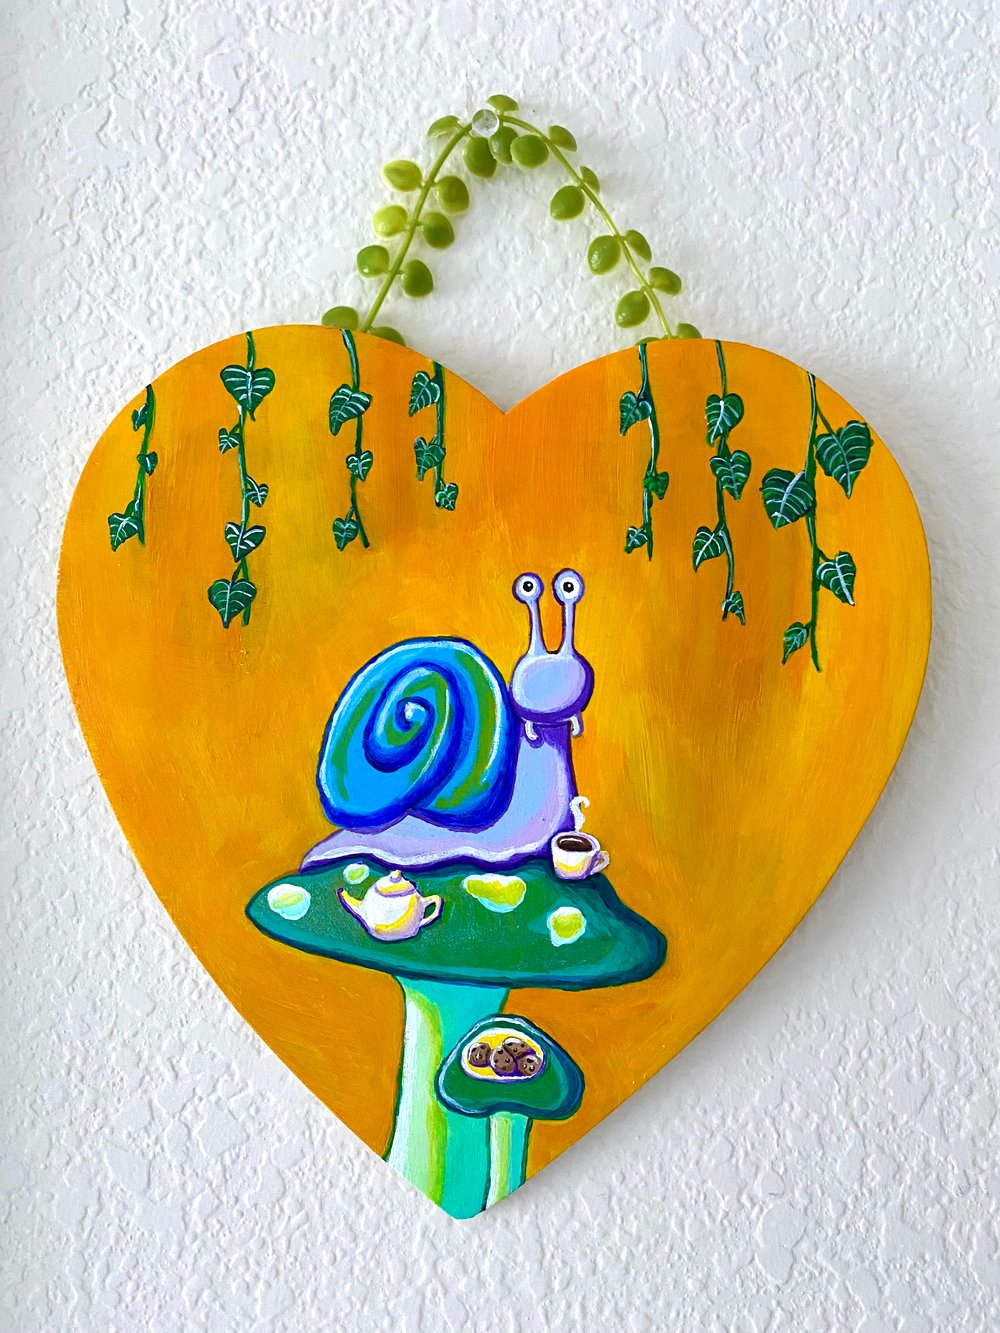 Image of "Tea Snail" Heart Shaped Painting